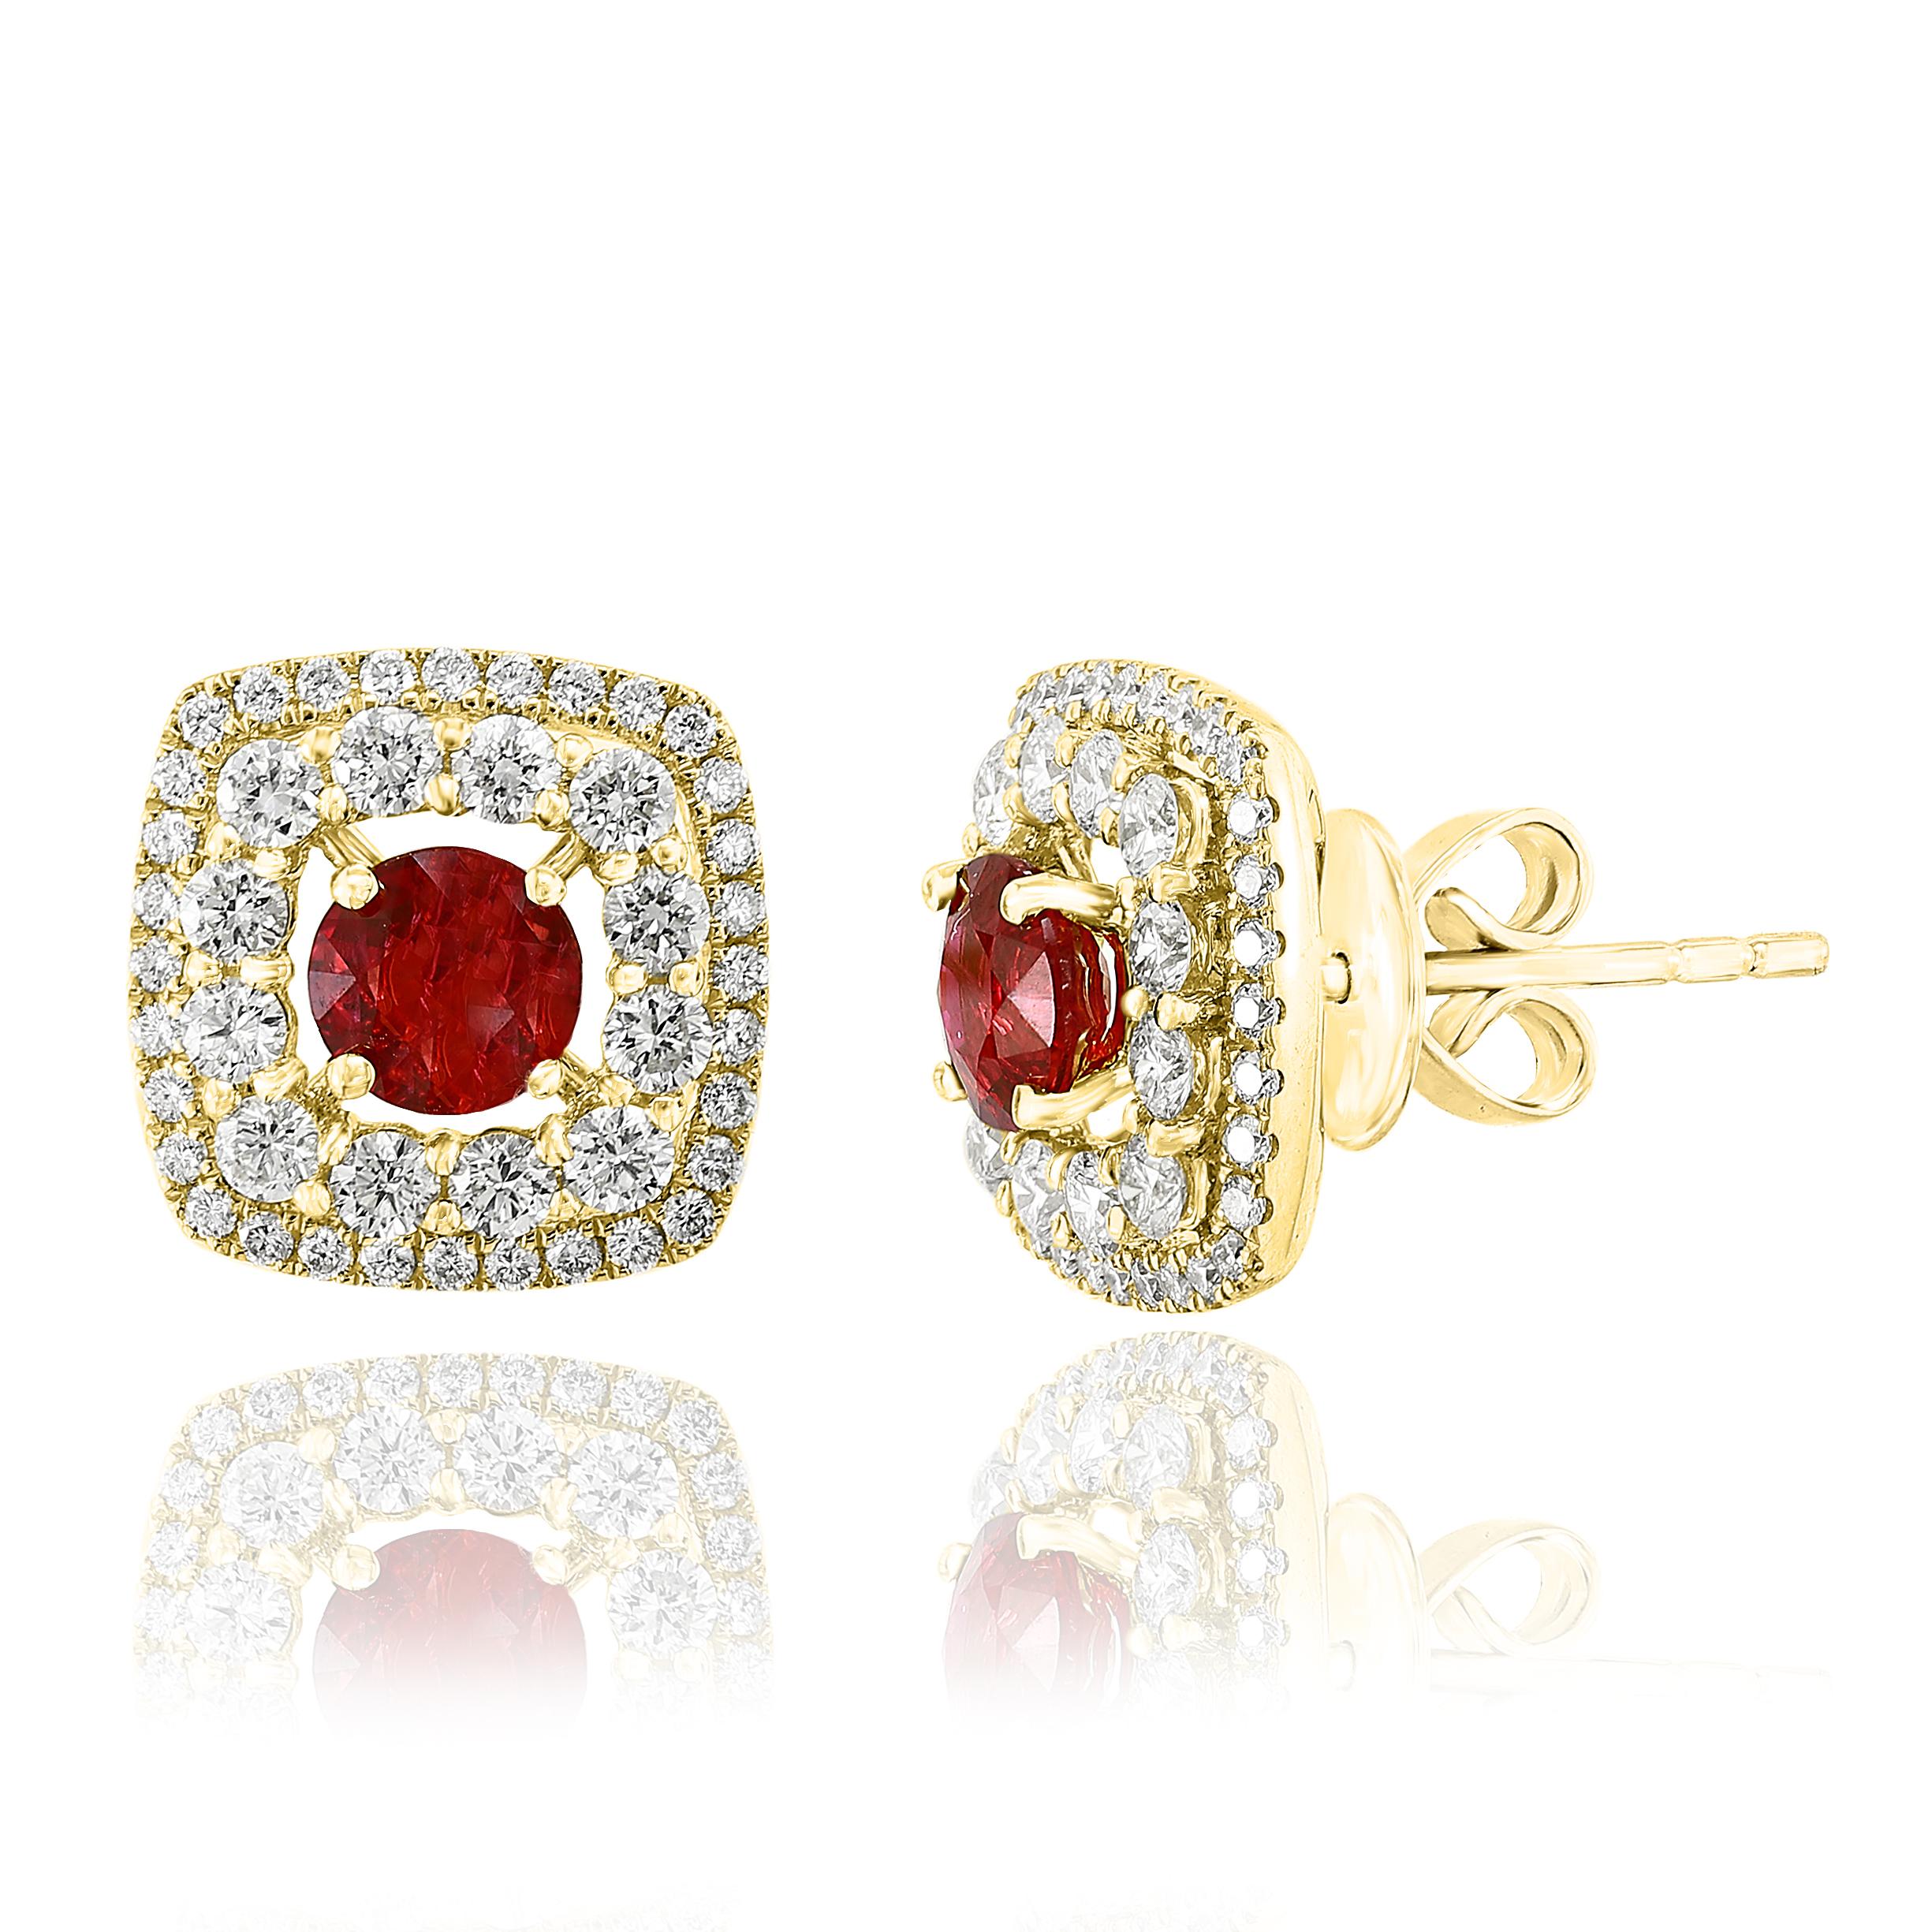 Contemporary 0.73 Carat Round Cut Ruby and Diamond Stud Earrings in 18K Yellow Gold For Sale